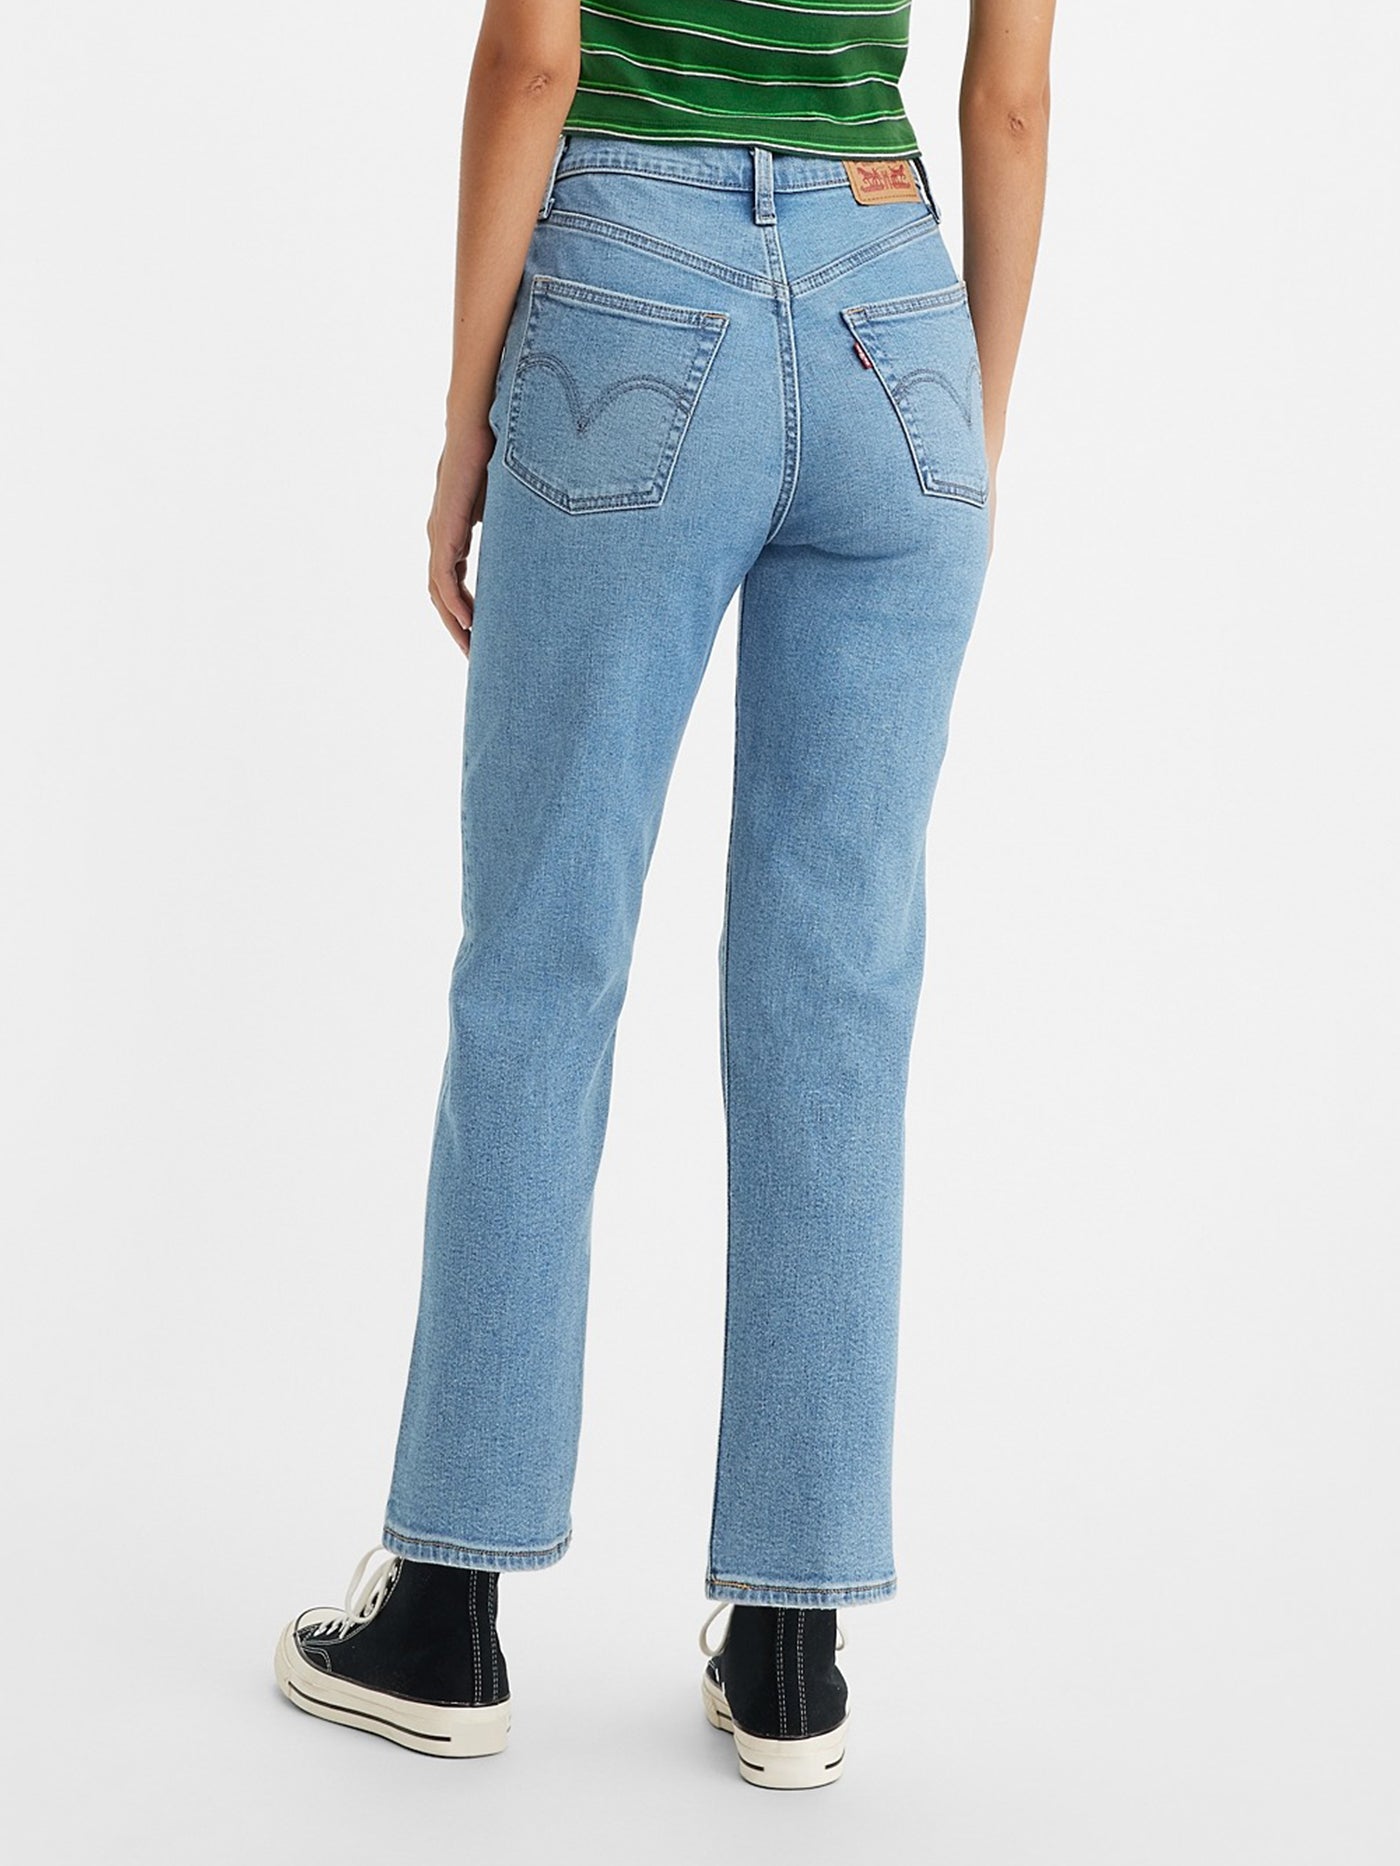 Levi's - Ribcage Straight Ankle Jeans - Faint Hearted – 88 Jeans